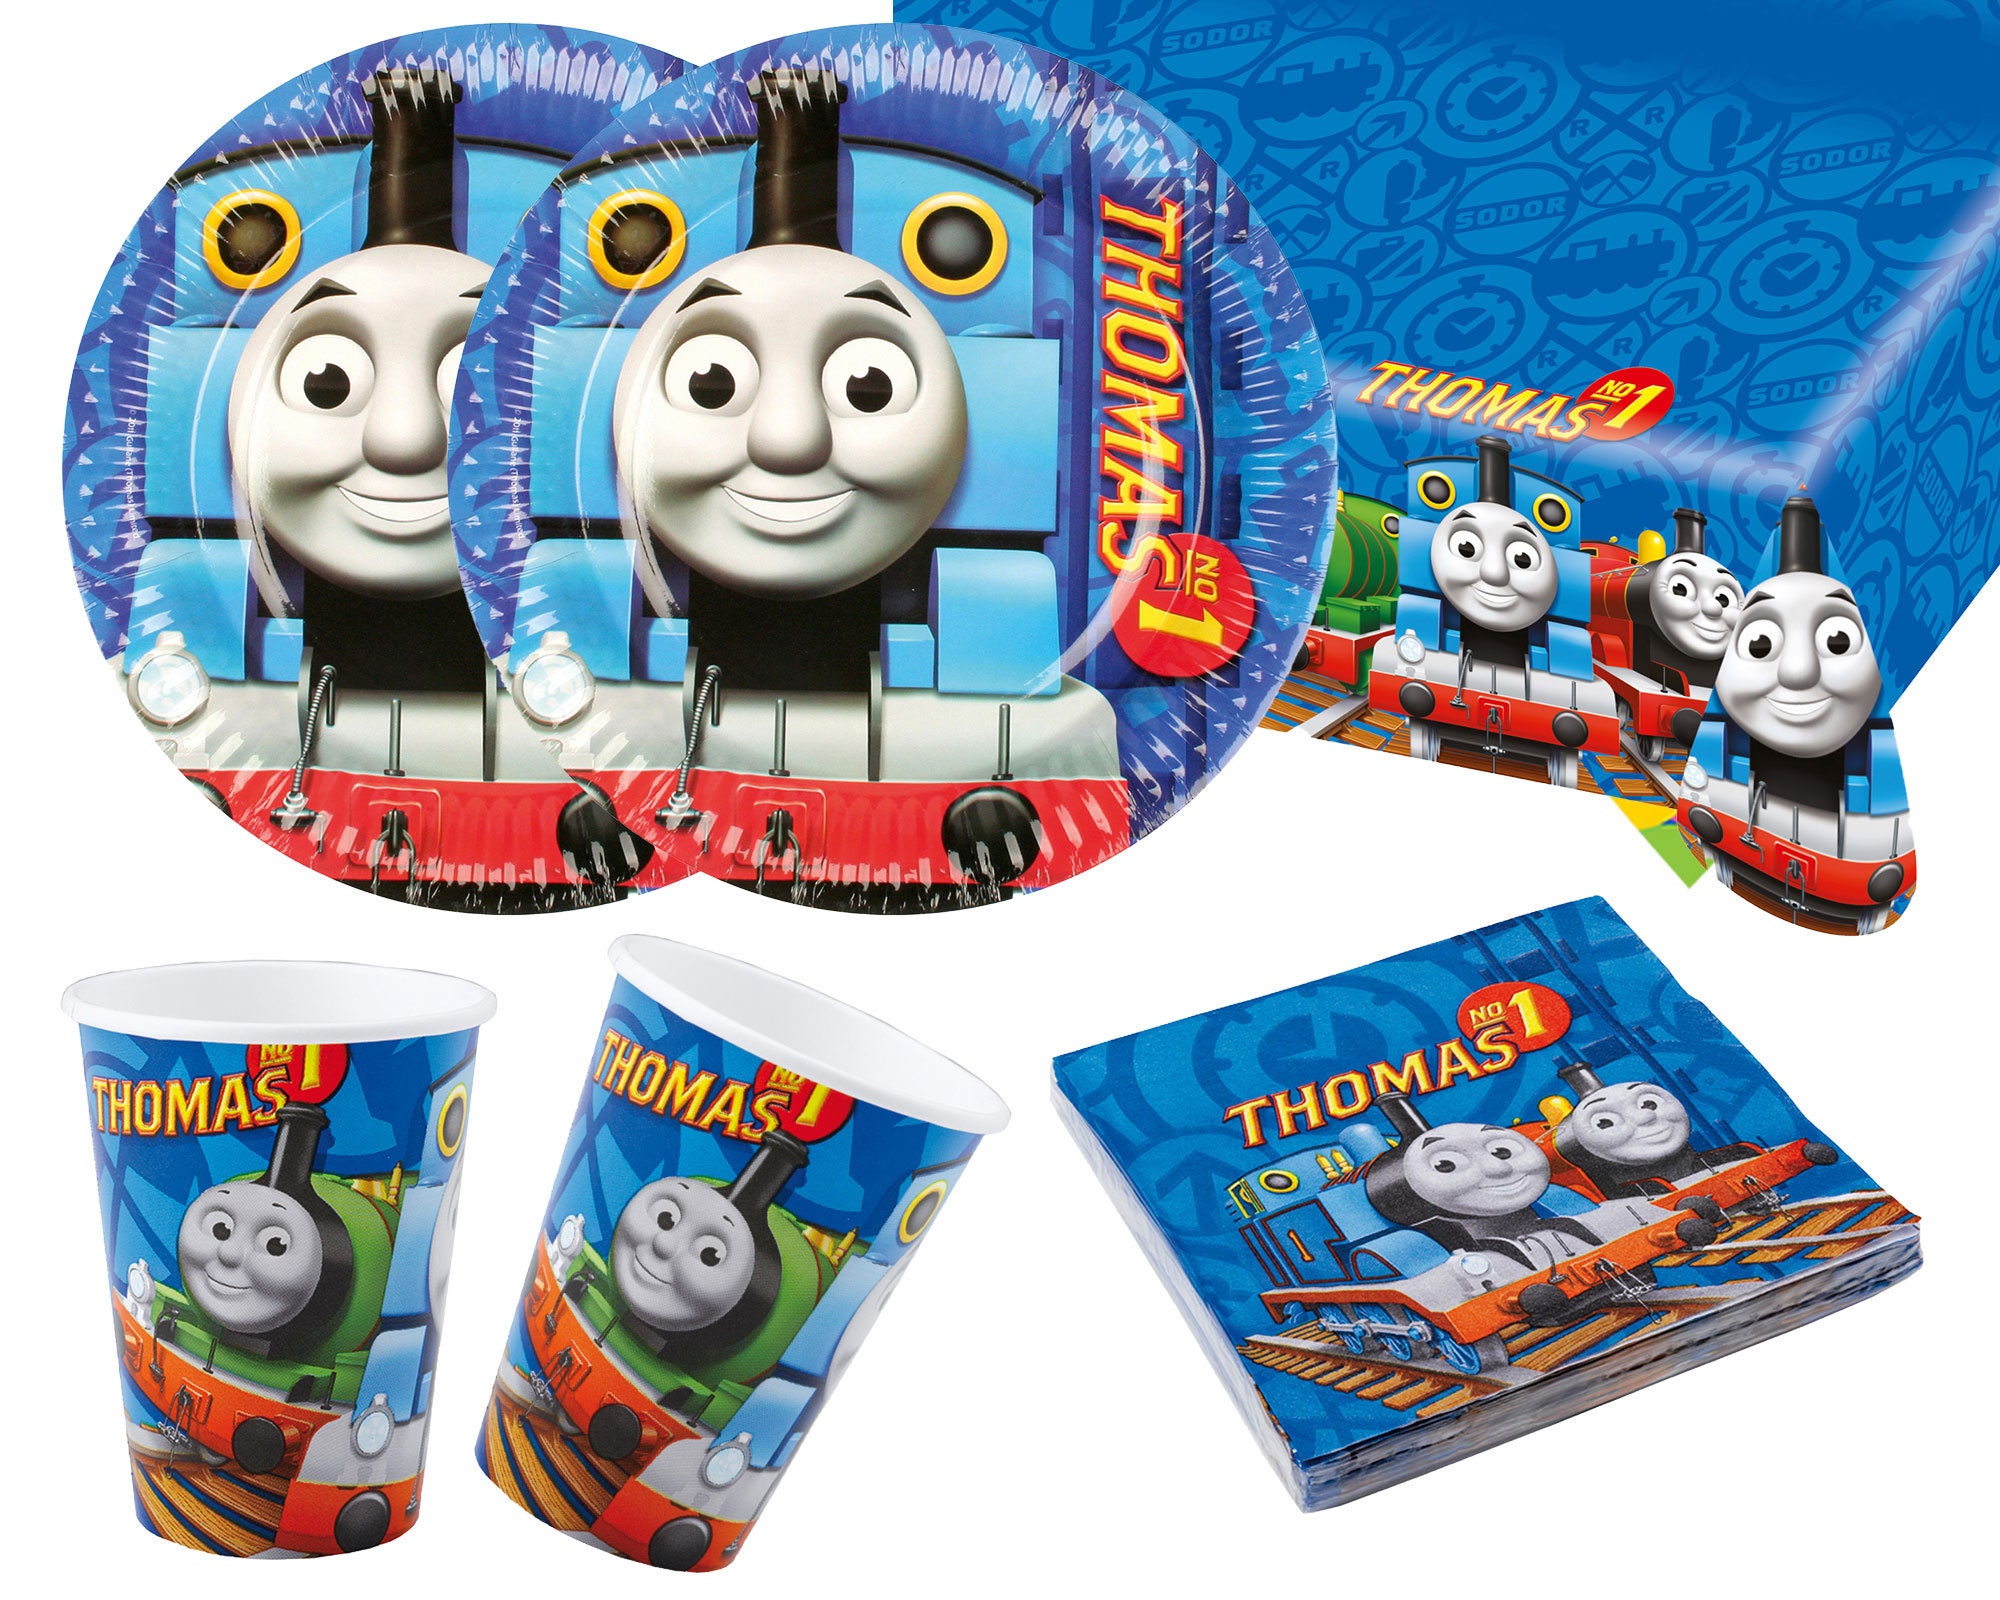 THOMAS THE TANK ENGINE birthday party BAKING CUPS train cupcake papers 50pcs